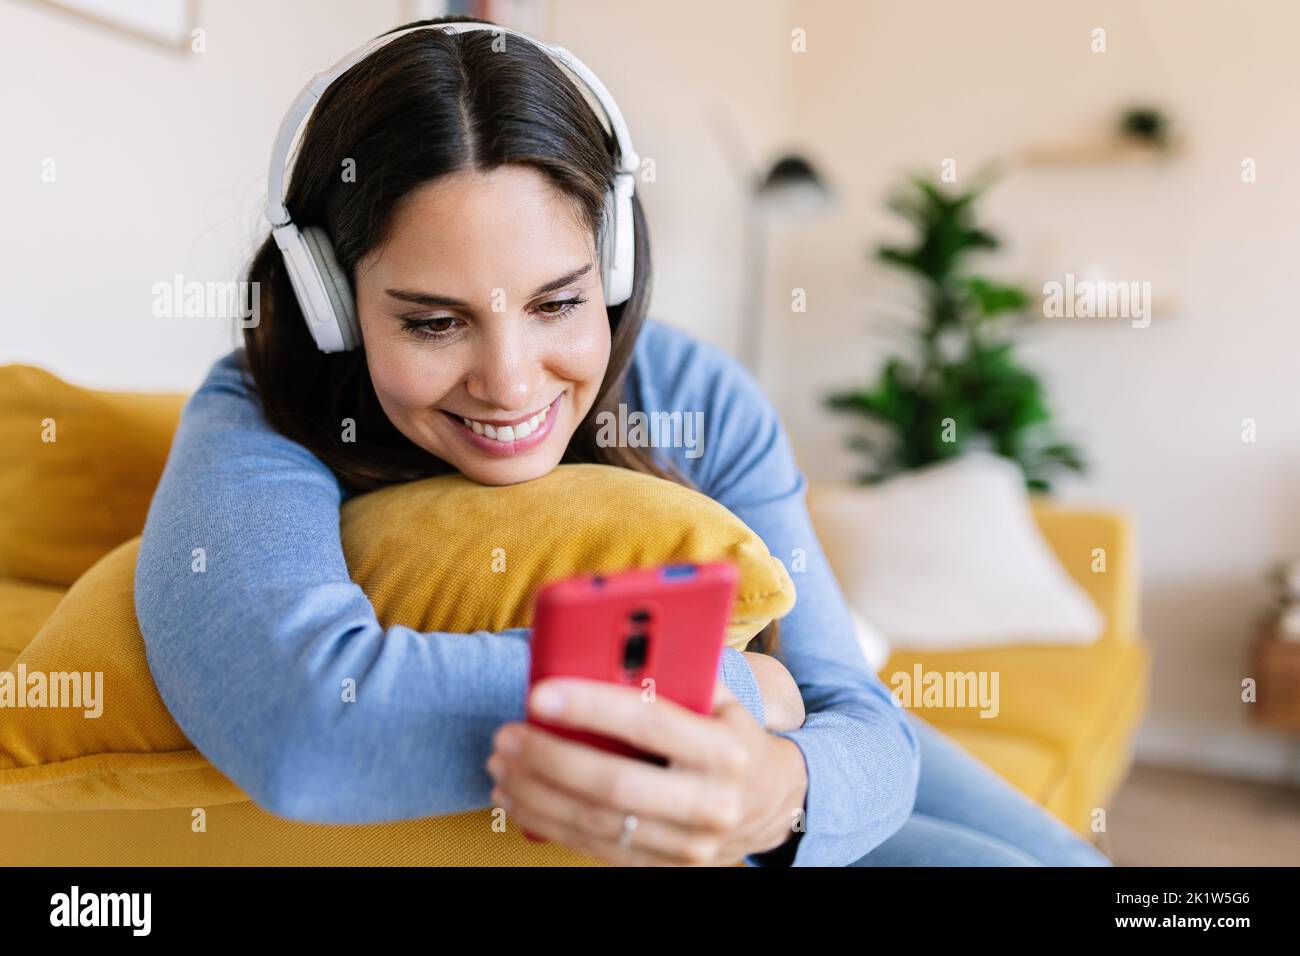 Smiling young woman with headphones using mobile phone lying on sofa at home Stock Photo